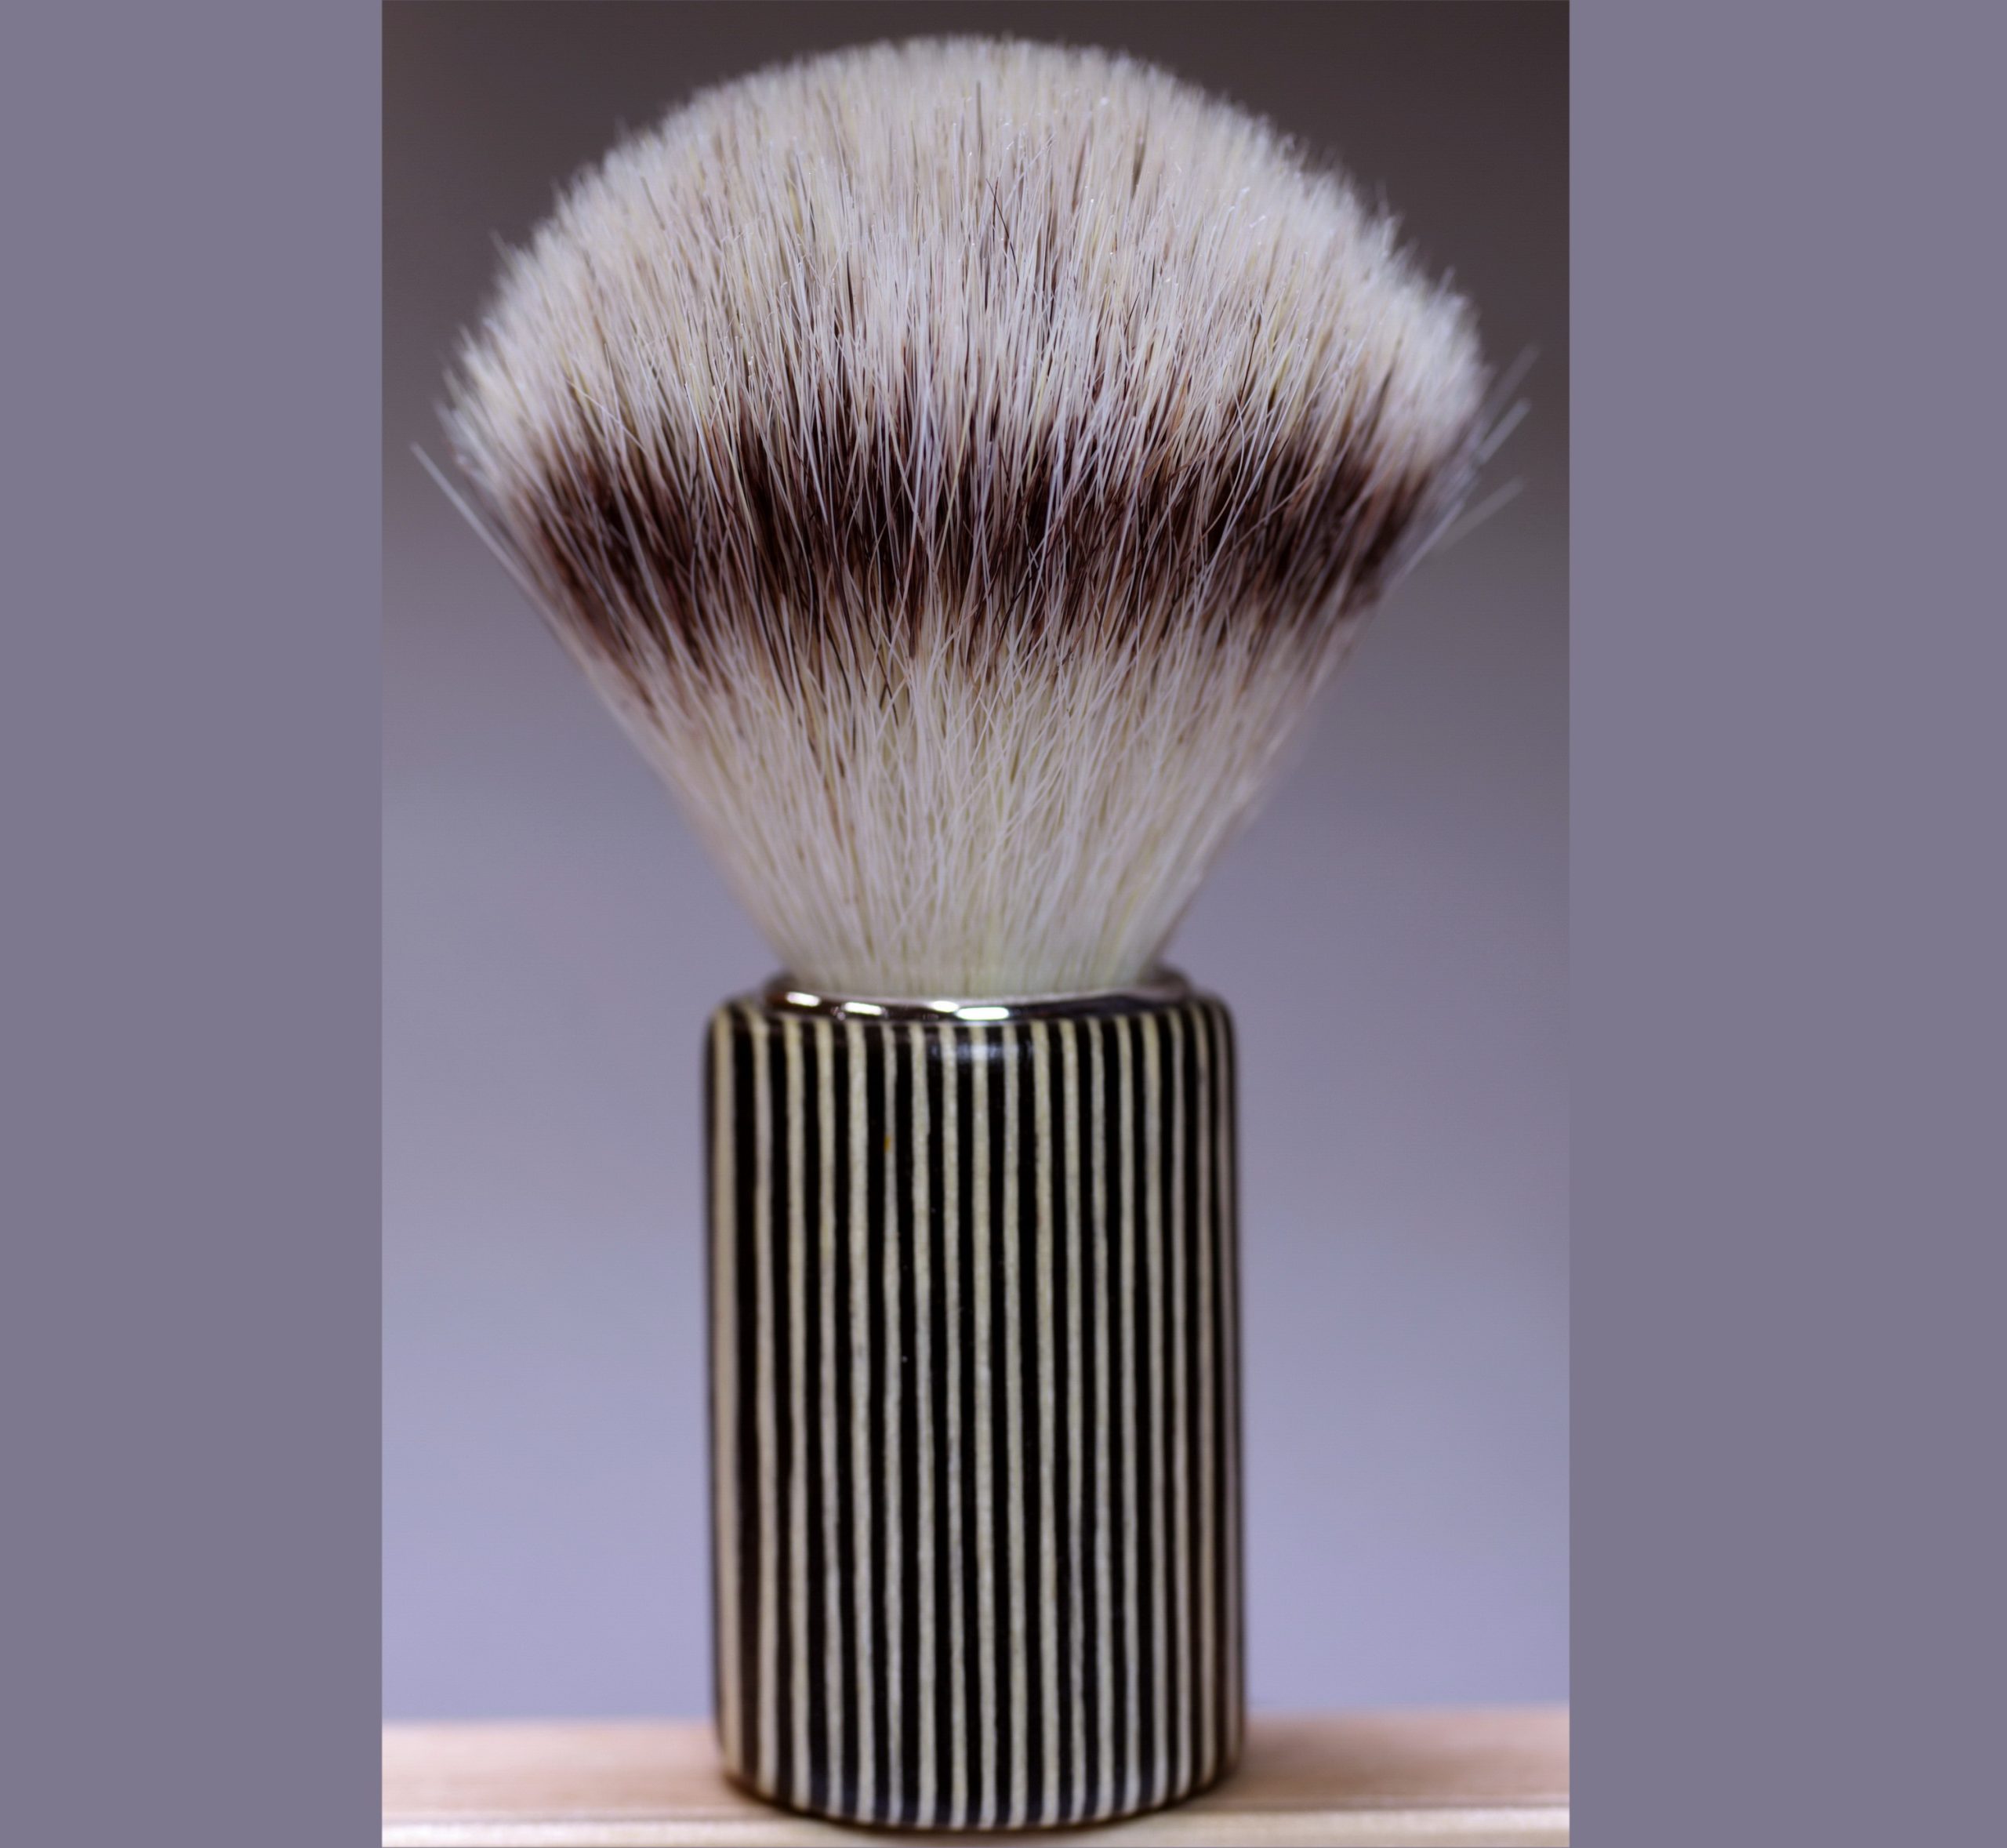 Badger Brush - 3 Size Options - Tomric Systems, Inc.